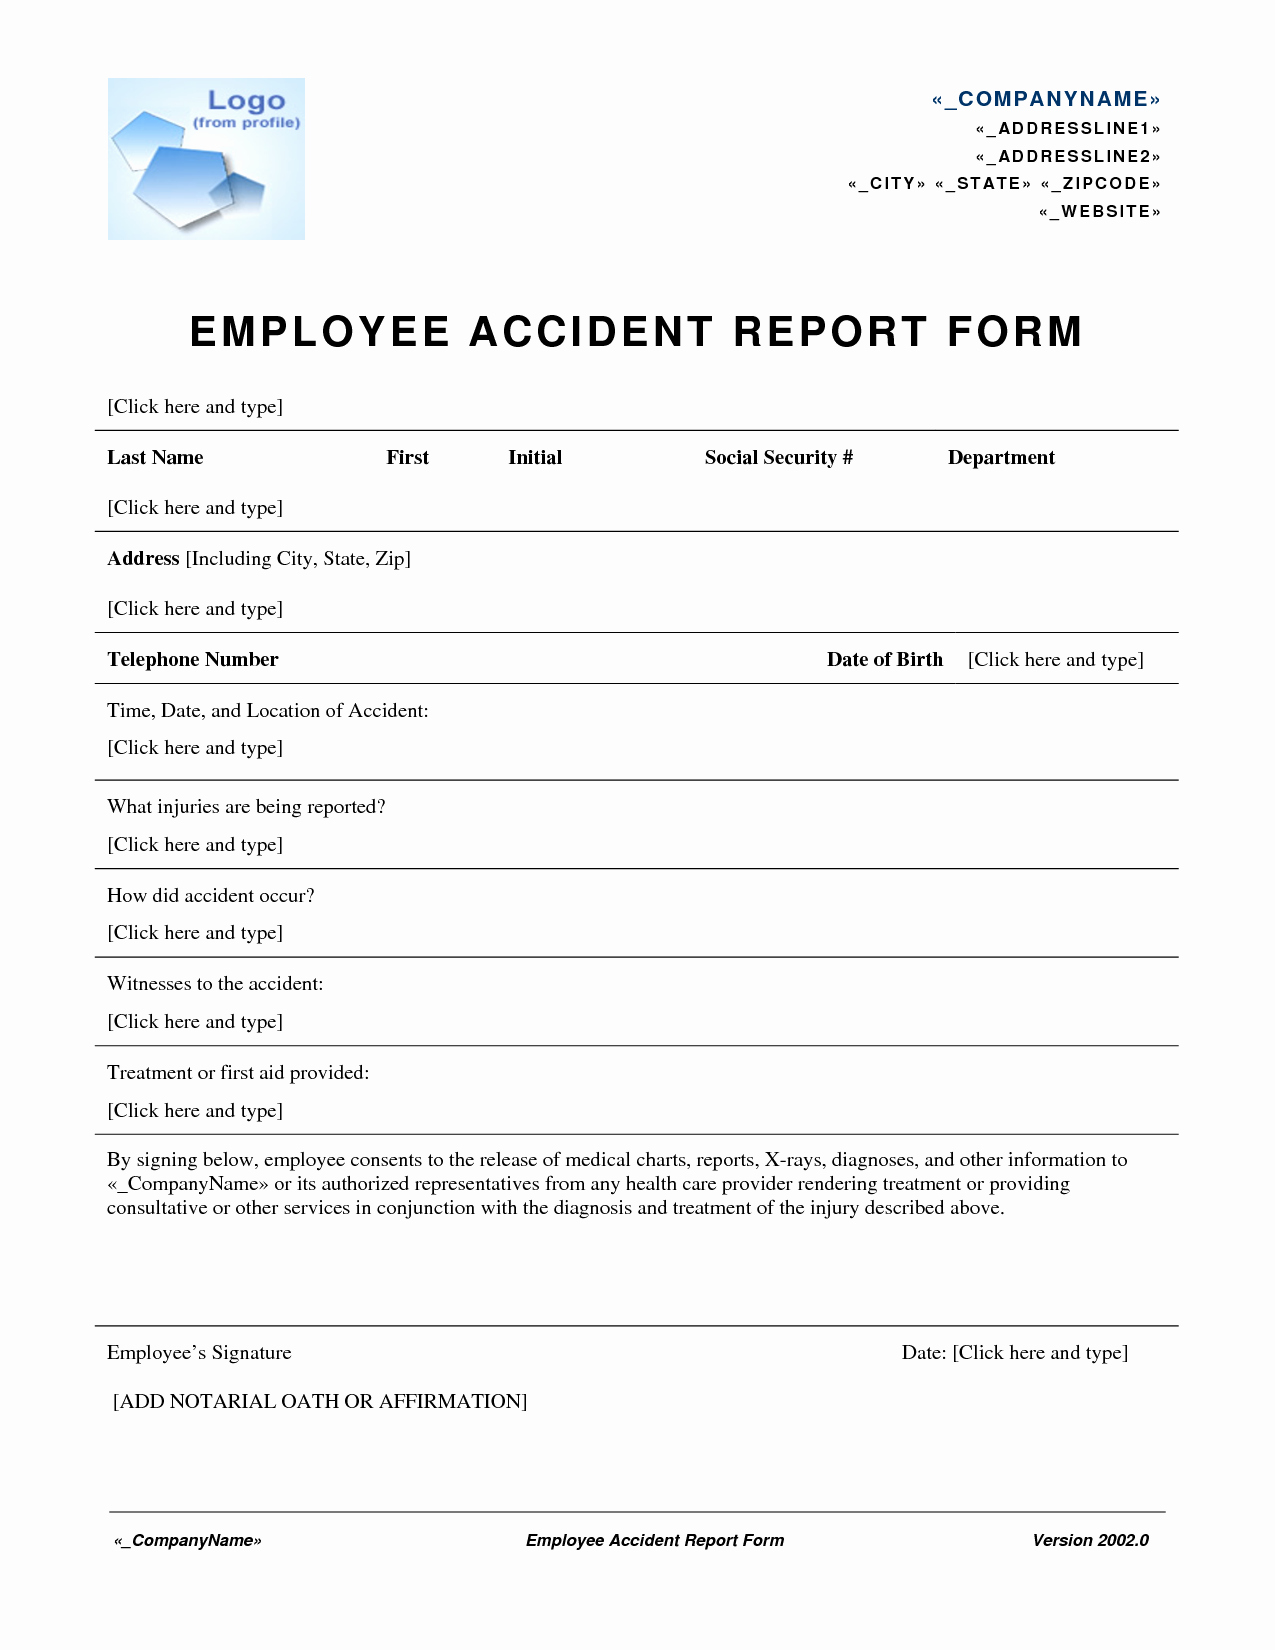 Employee Accident Report Template New Best S Of Employee Accident Report form Employee